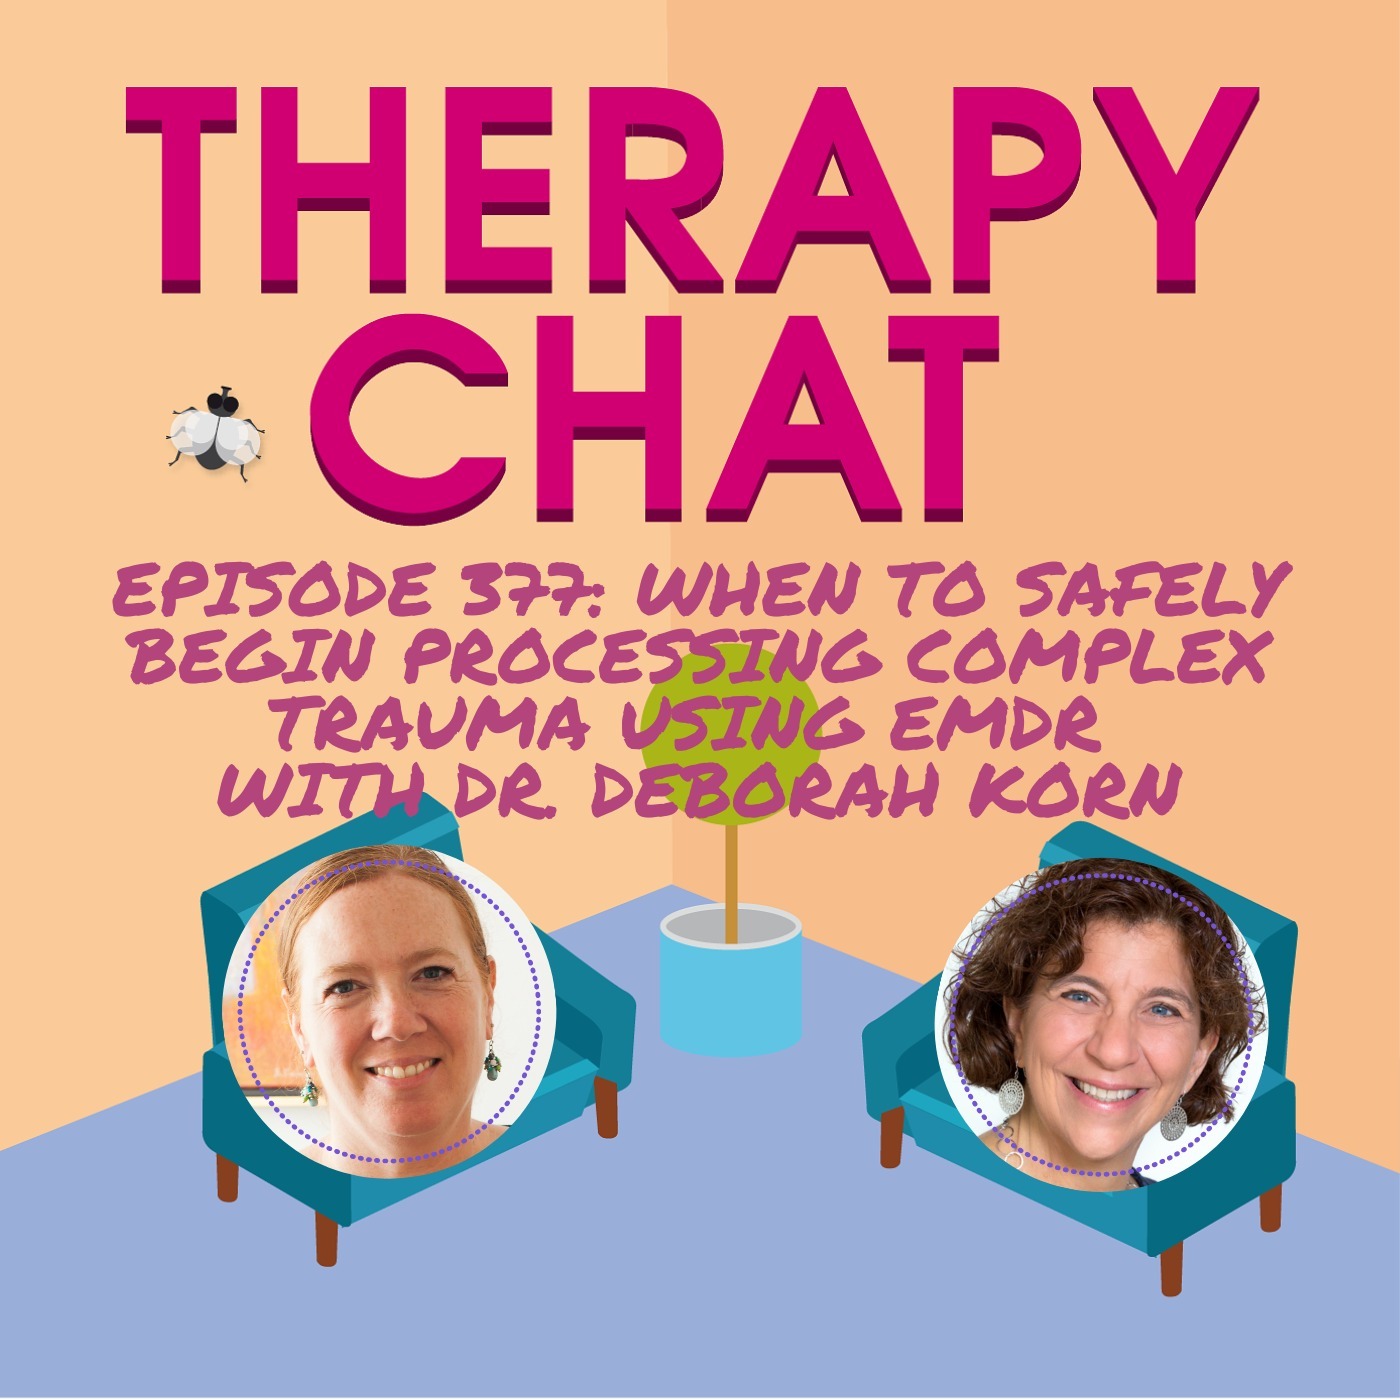 377: When to Safely Begin Processing Complex Trauma Using EMDR with Dr. Deborah Korn